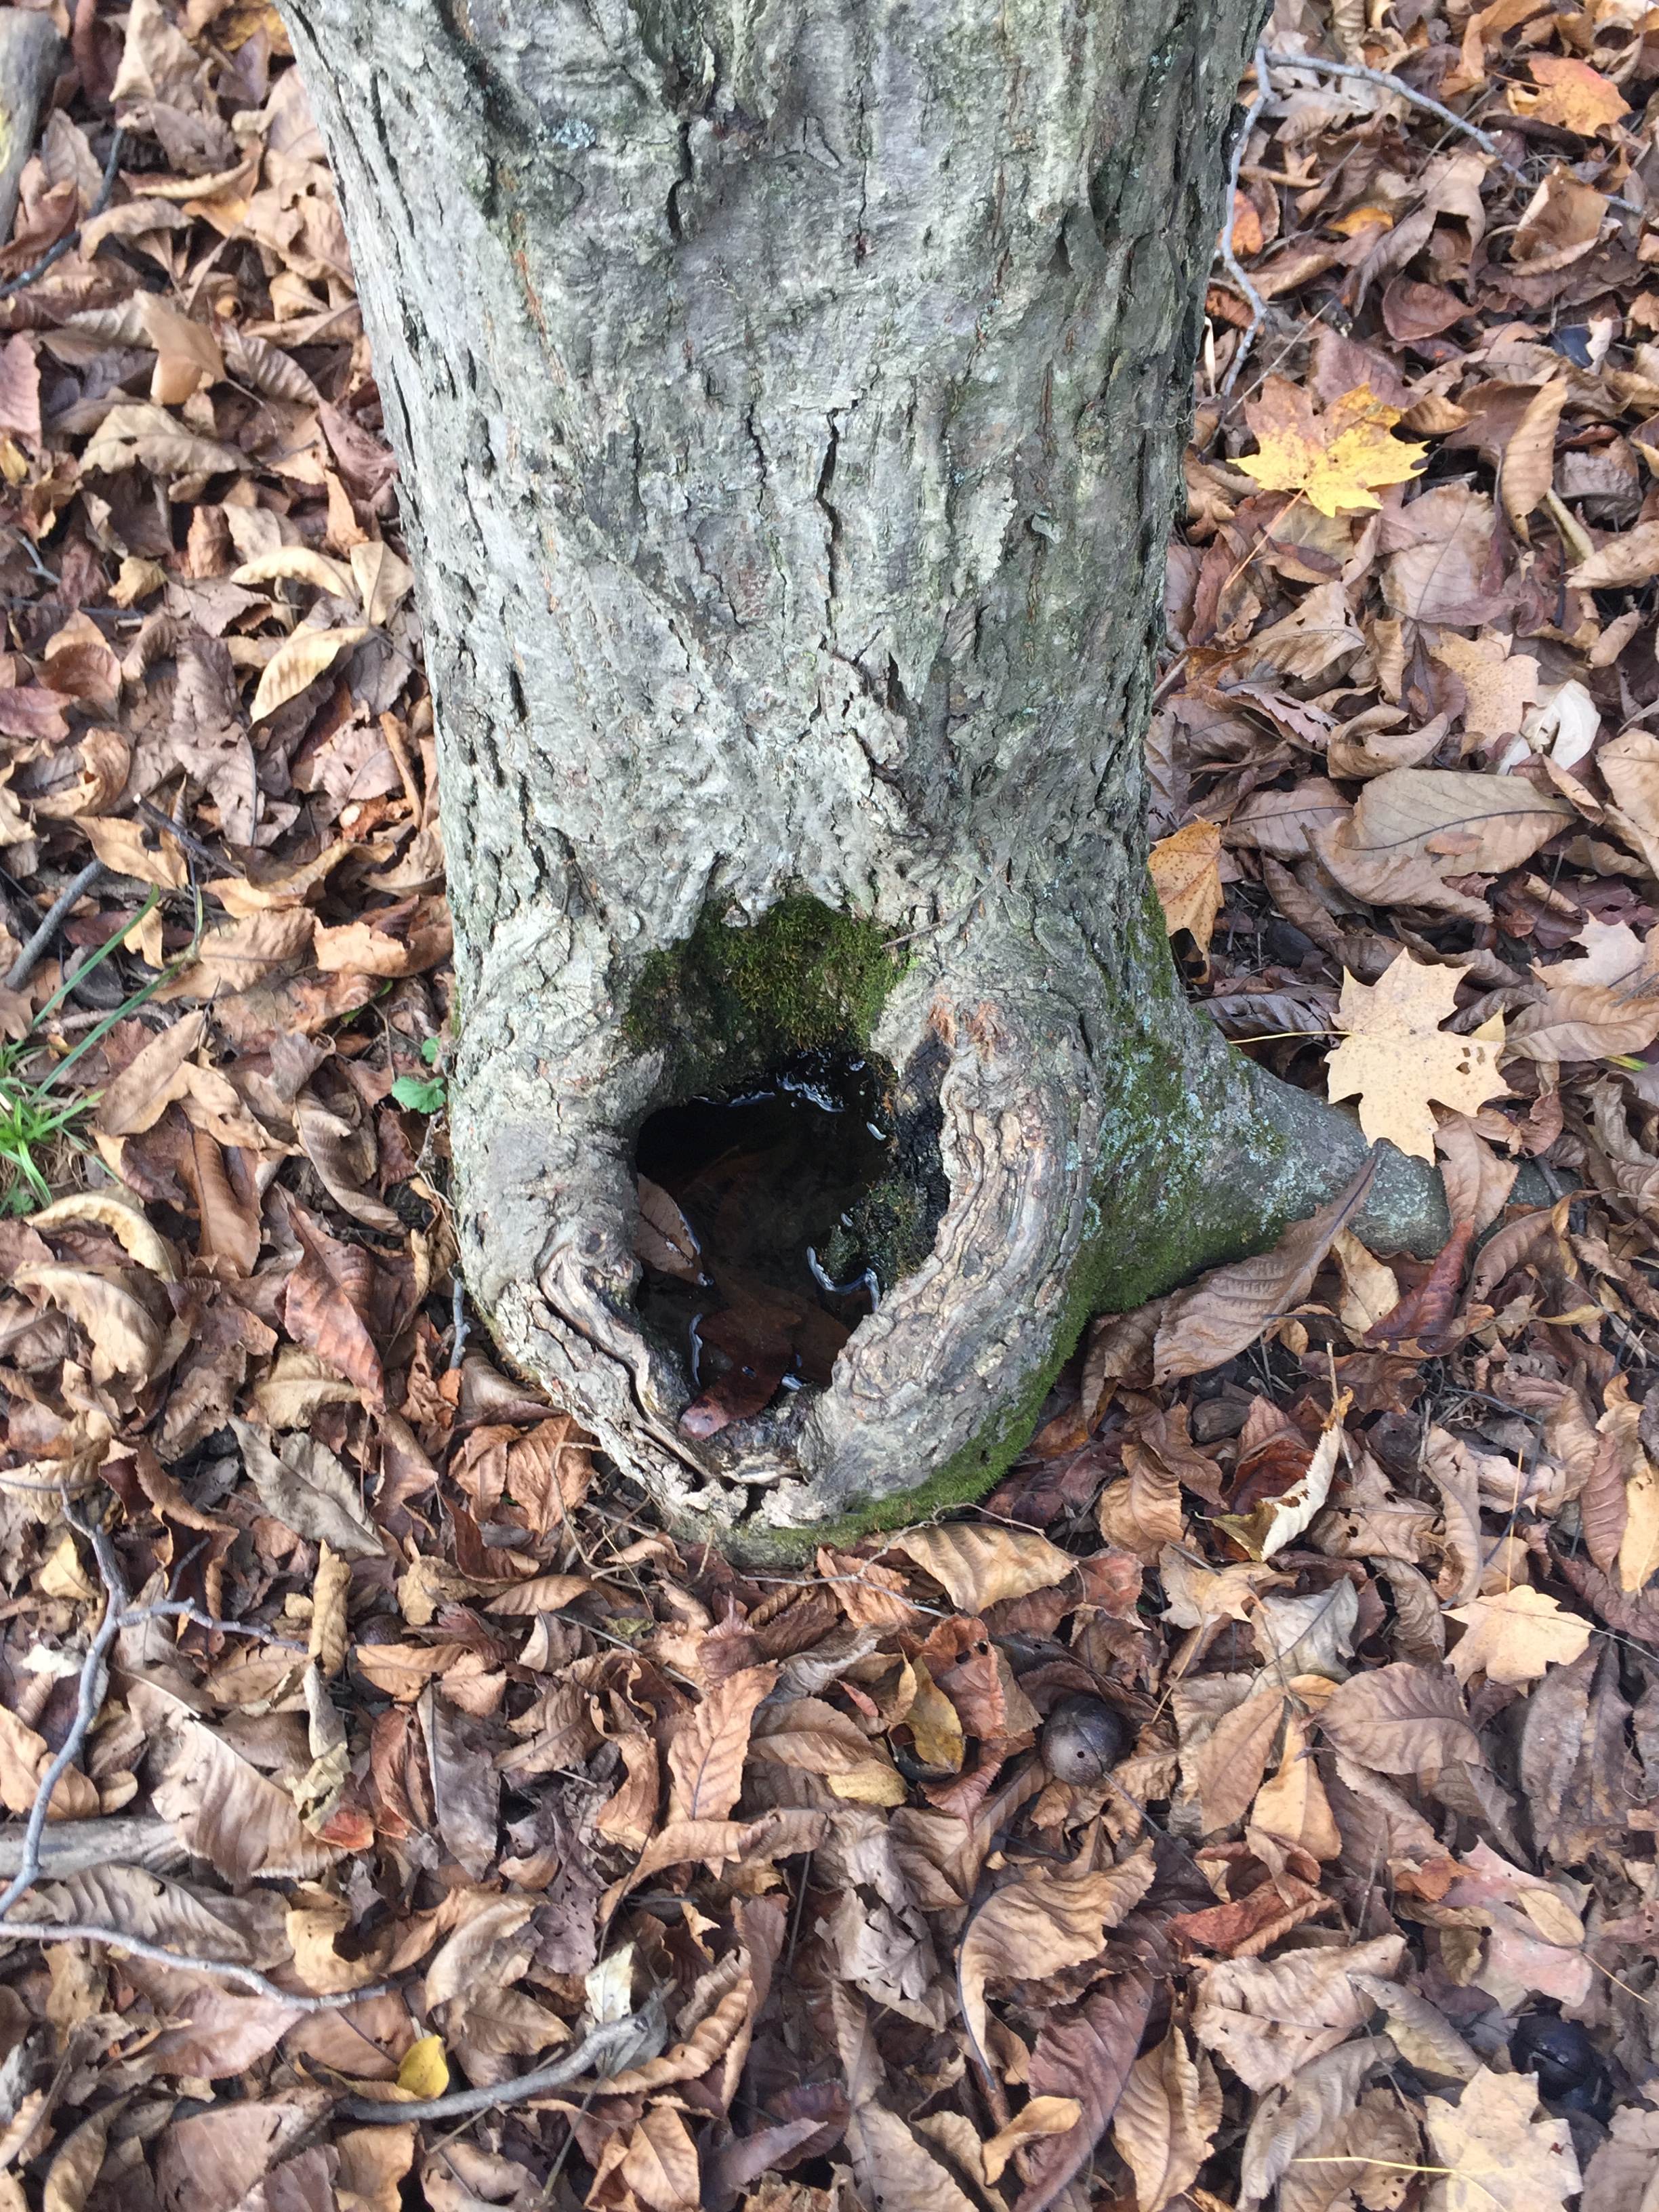 The eastern treehole mosquito, which can transmit La Crosse virus in Indiana, can breed in treeholes containing rainwater. Photo: Lee Green, Indiana State Department of Health.